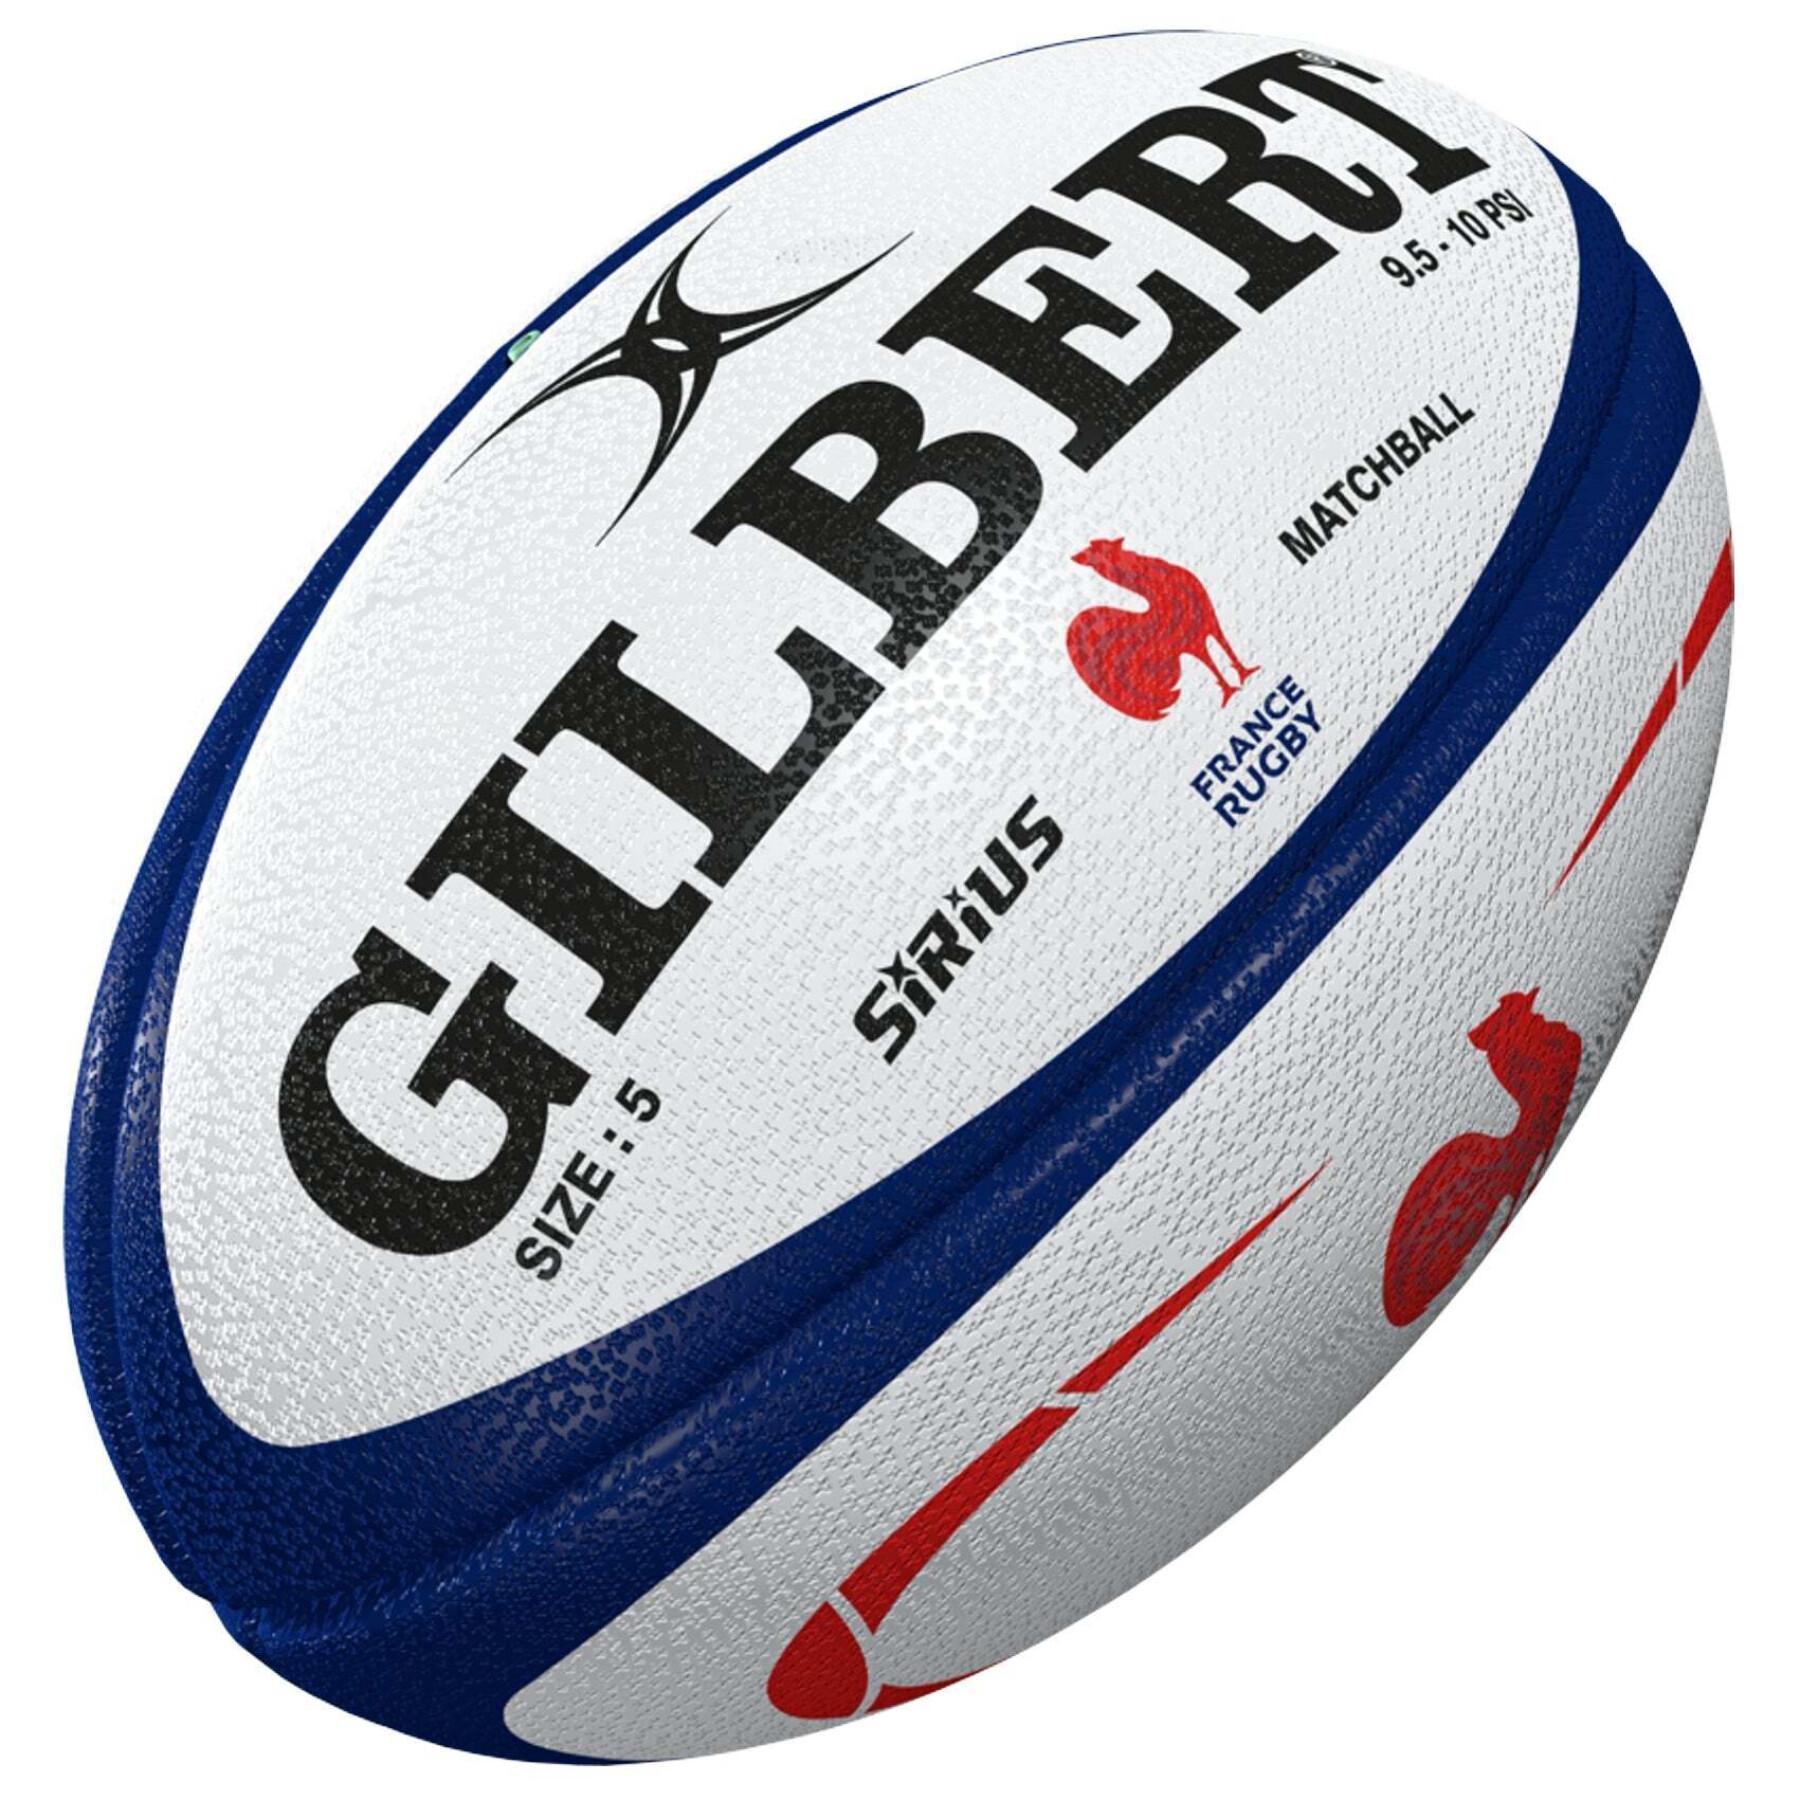 Rugby ball France Match Sirius